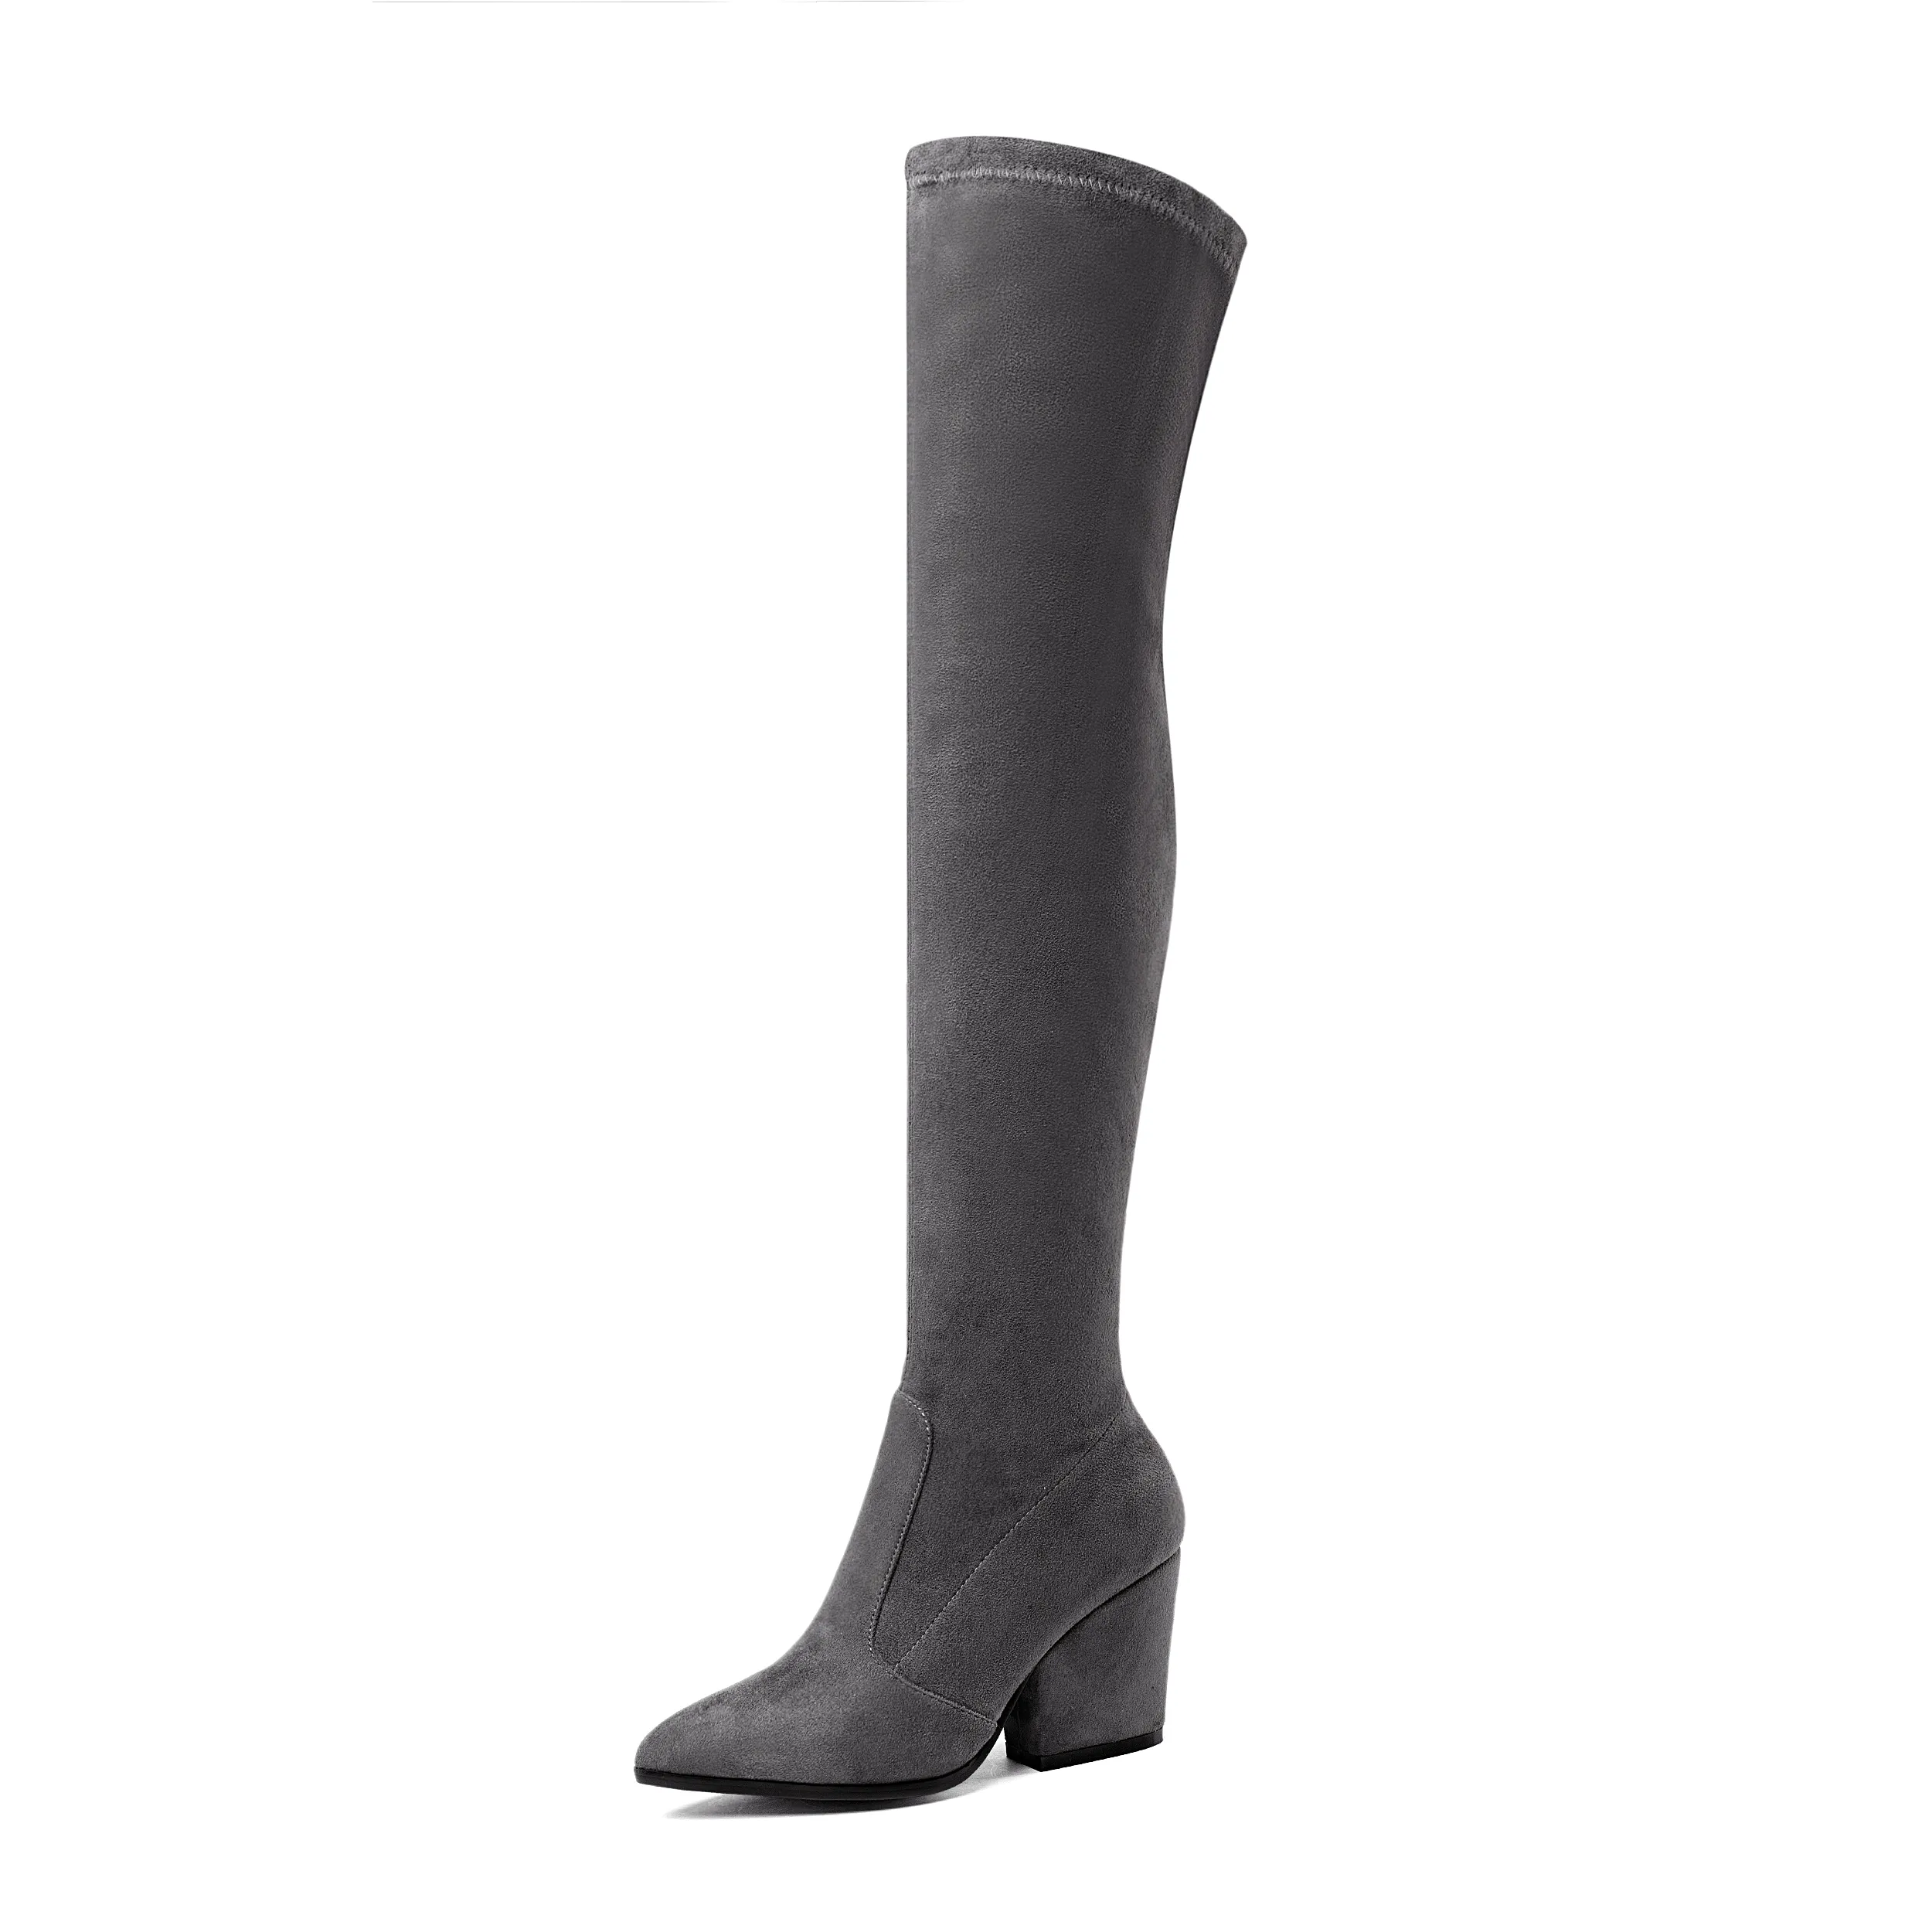 Women Over The Knee High Boots Wedges Heels Winter Shoes Pointed Toe Sexy Elastic Fabric Women Boots Size 34-43